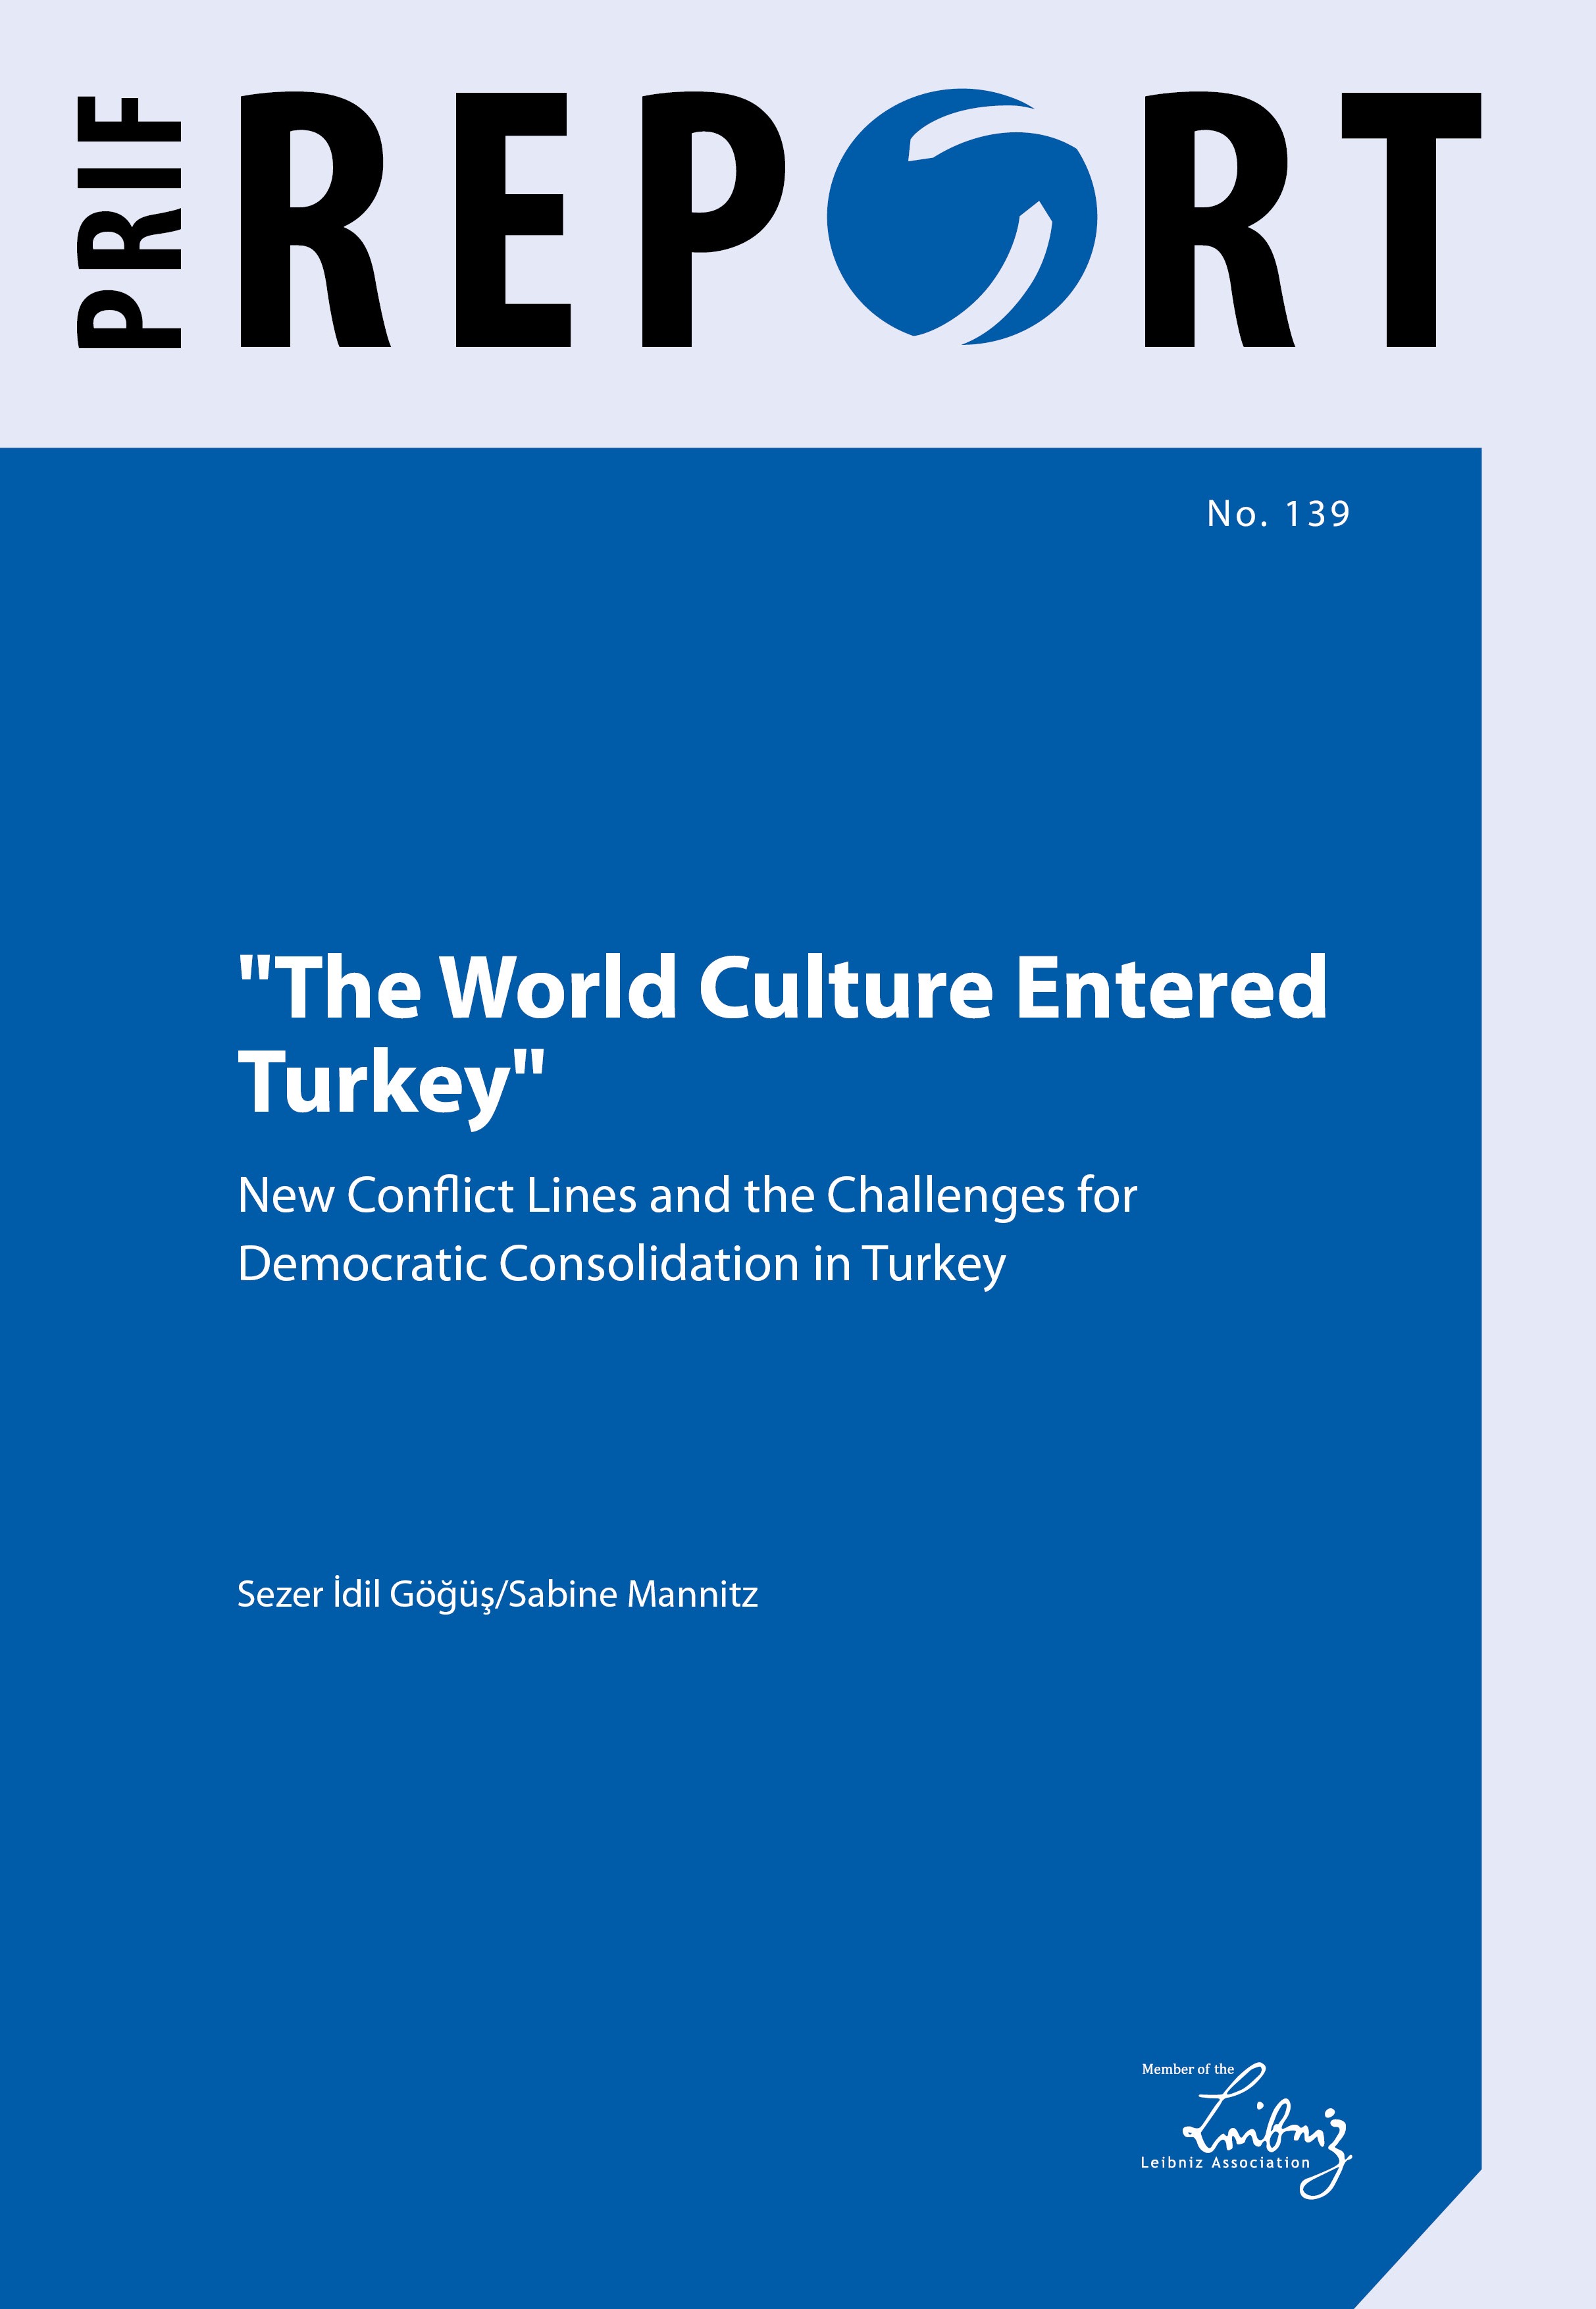 Download: "The World Culture Entered Turkey"